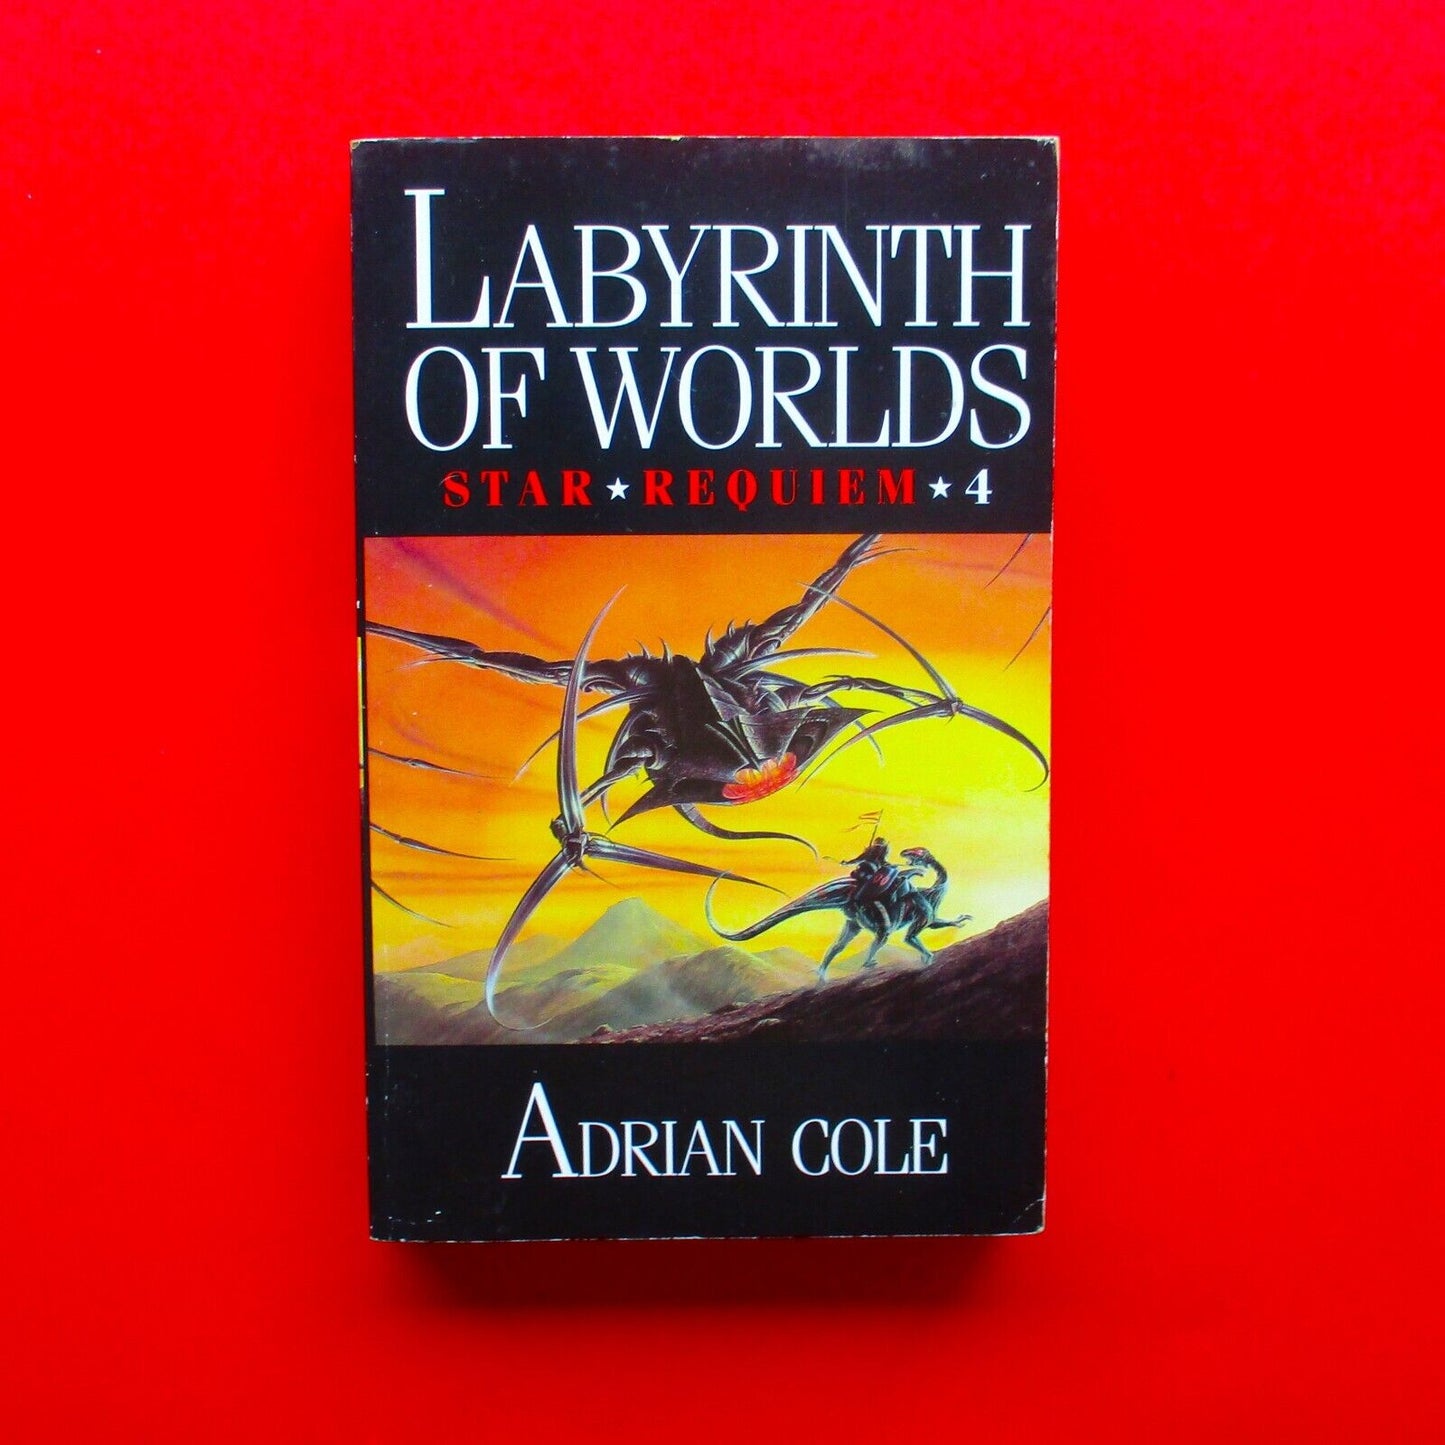 Labyrinth of the Worlds by Adrian Cole Star Requiem Book 4